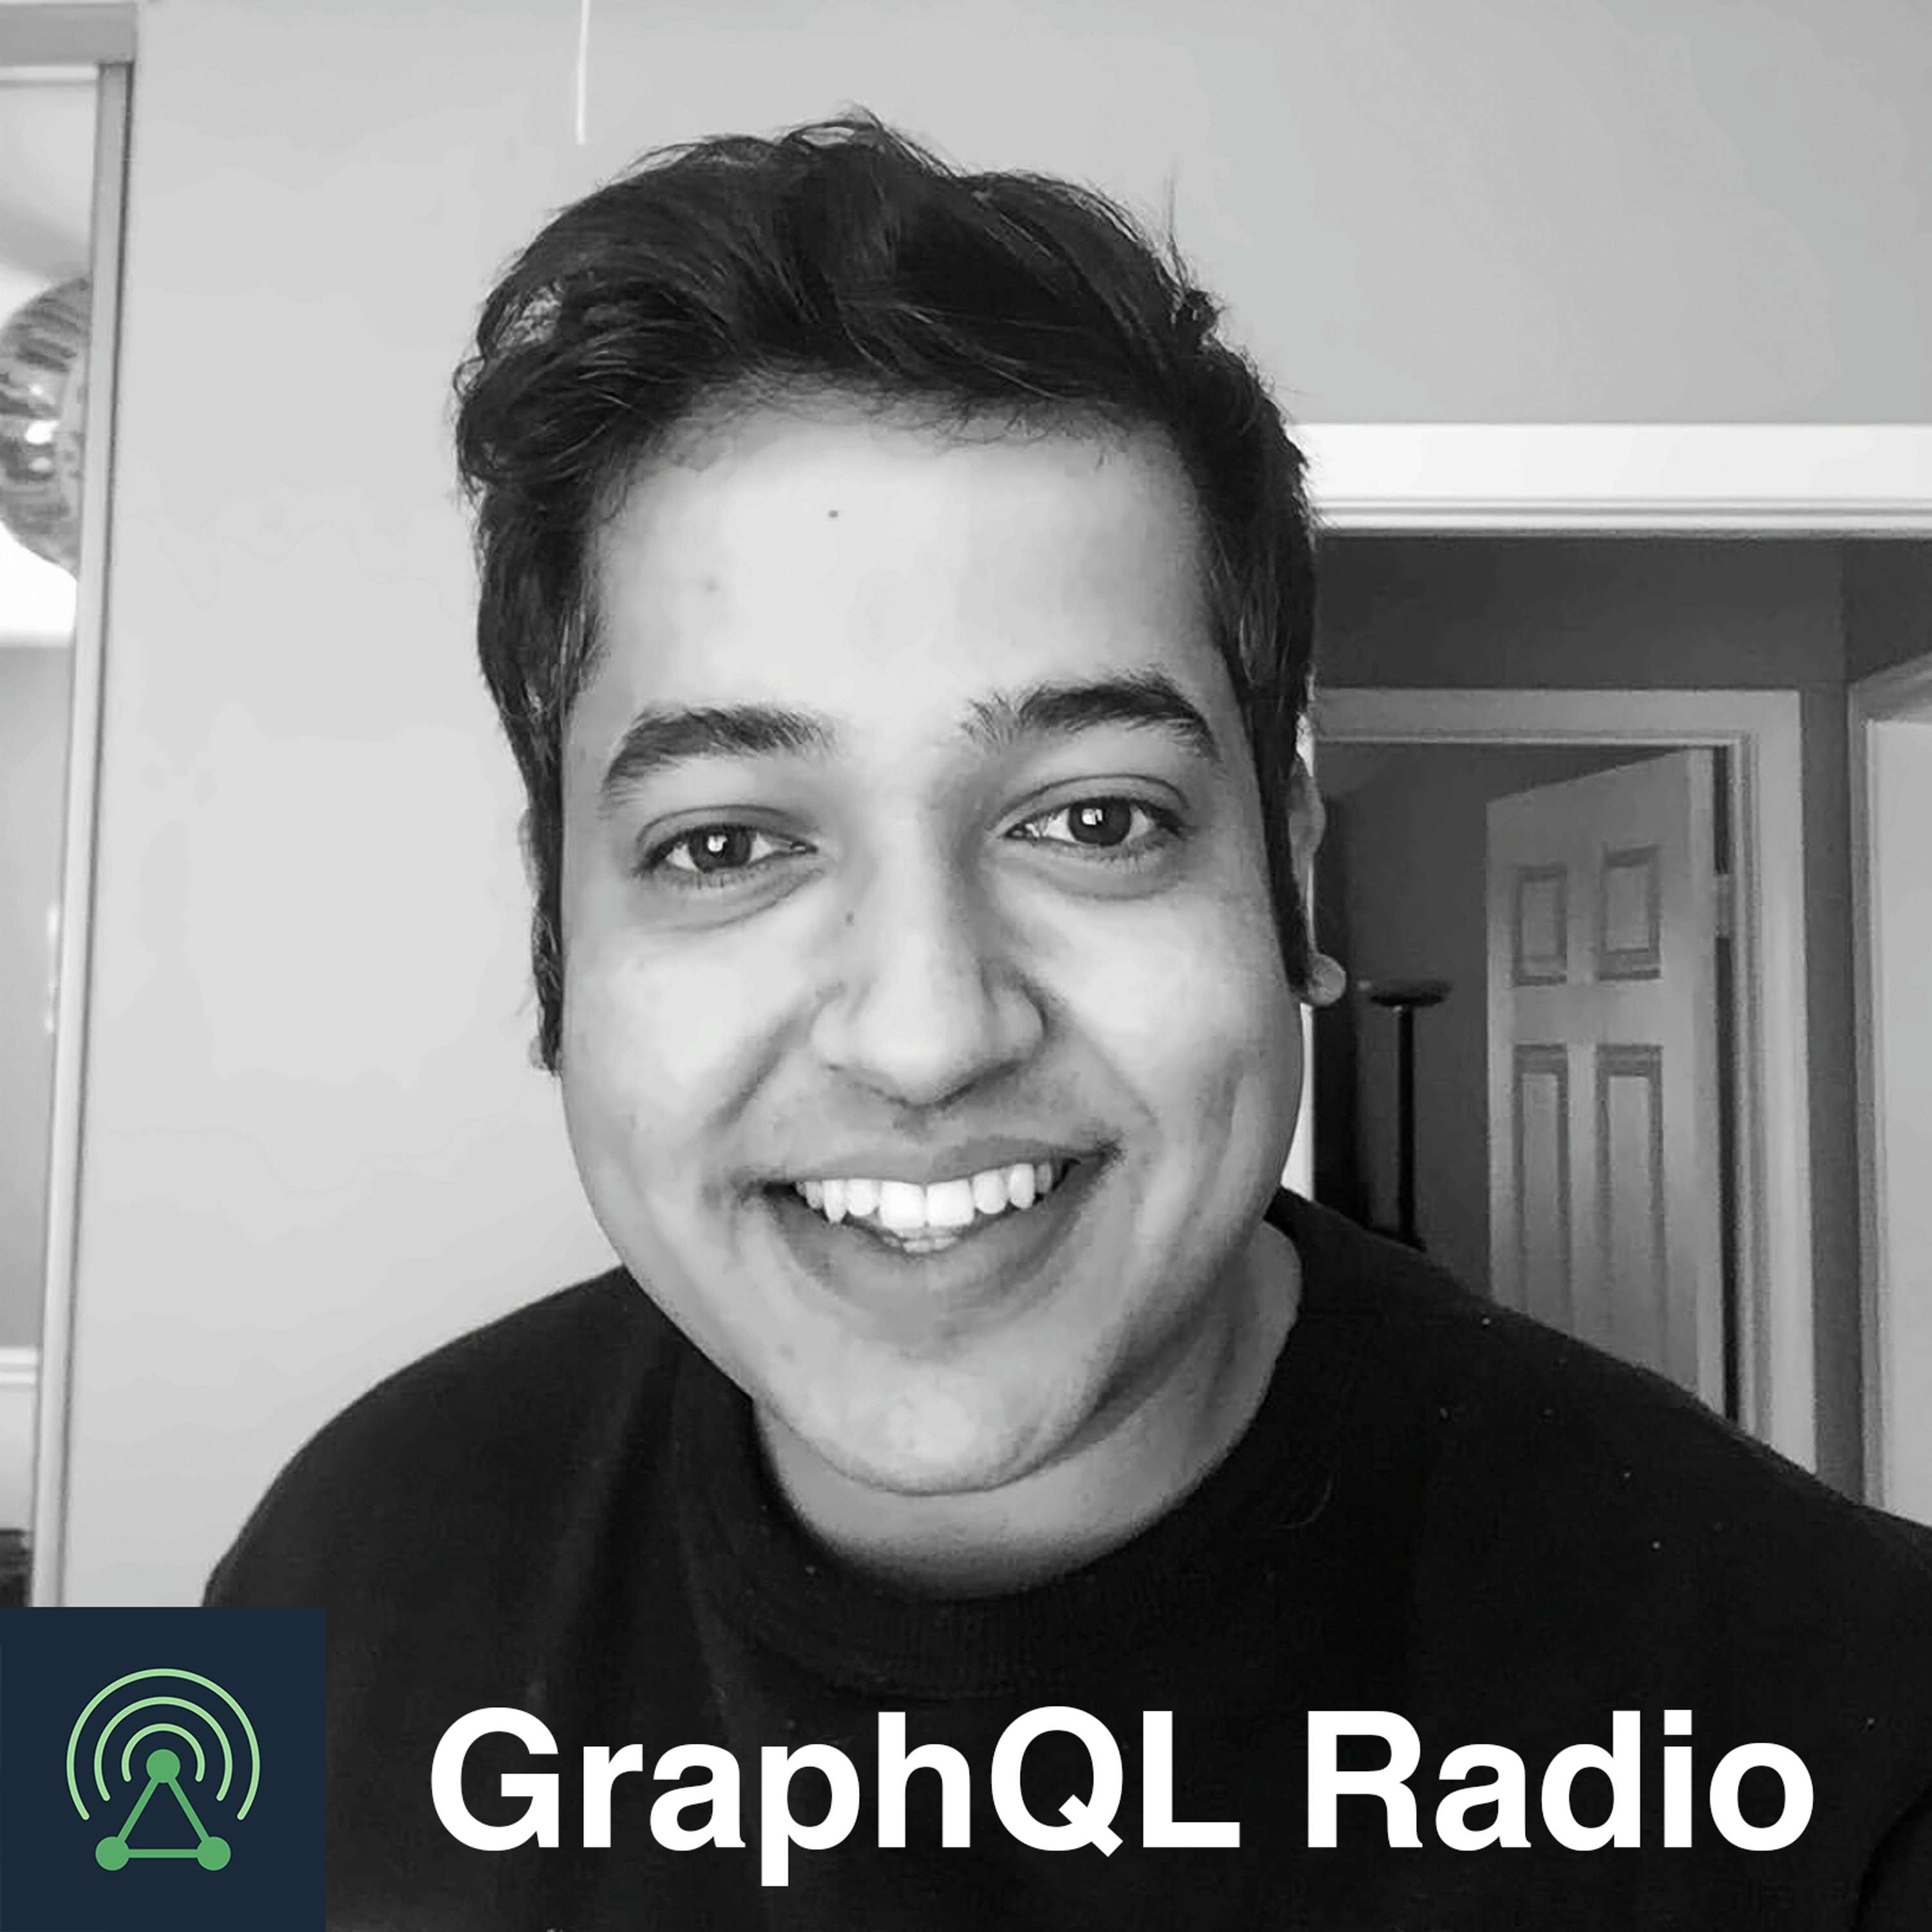 Abhi Aiyer from Gatsby on Getting into Coding, Finding Mentors, Jumping into Engineering, Impostor Syndrome, Gatsbyverse, Aiming to be Useful, Soft Skills, Early GraphQL Era, Federation Experiments, R